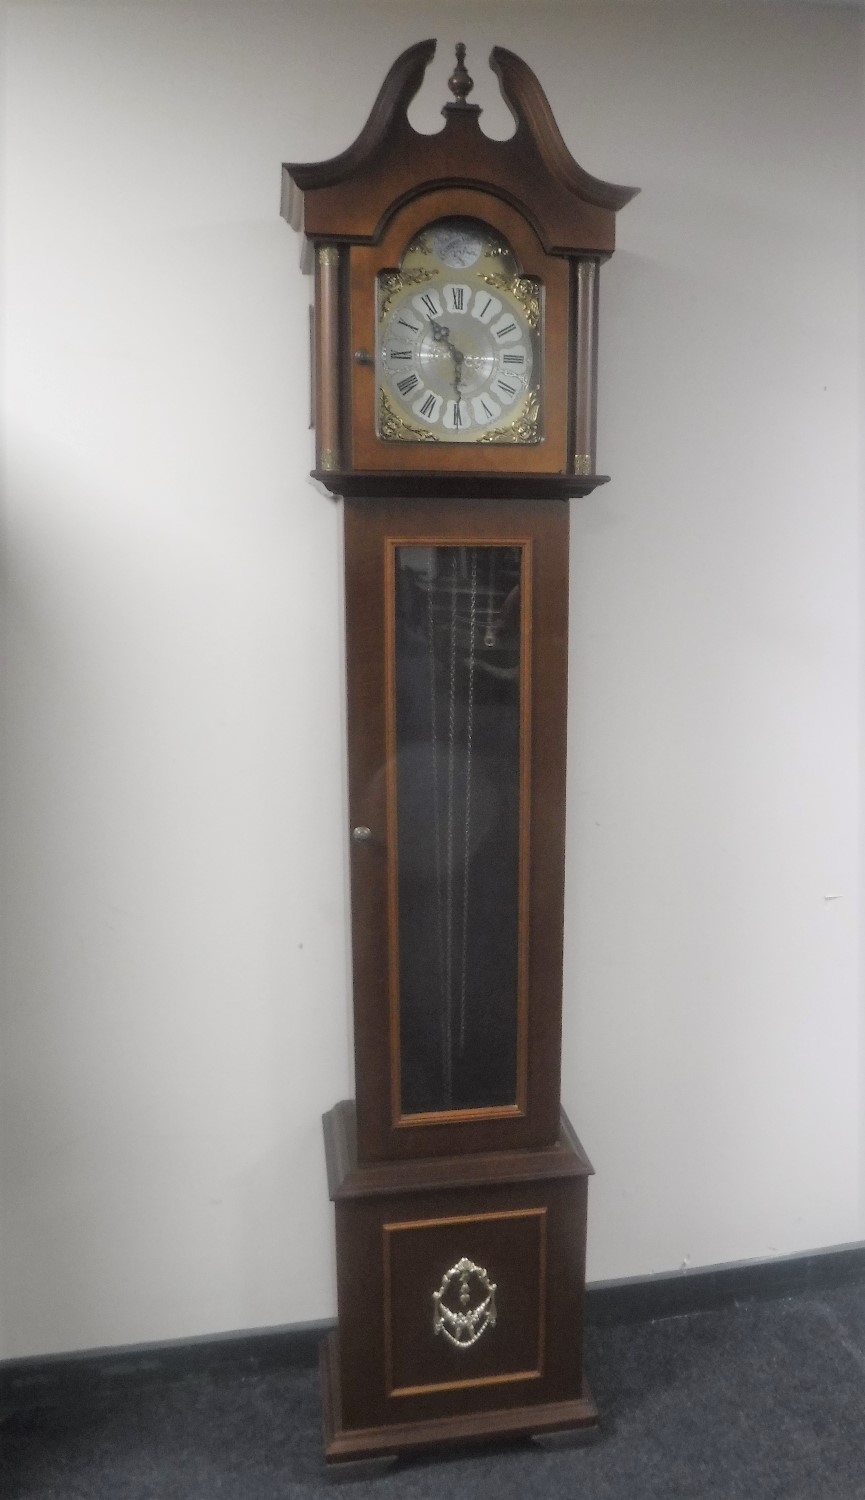 A Tempus Fugit longcase clock with pendulum and weights